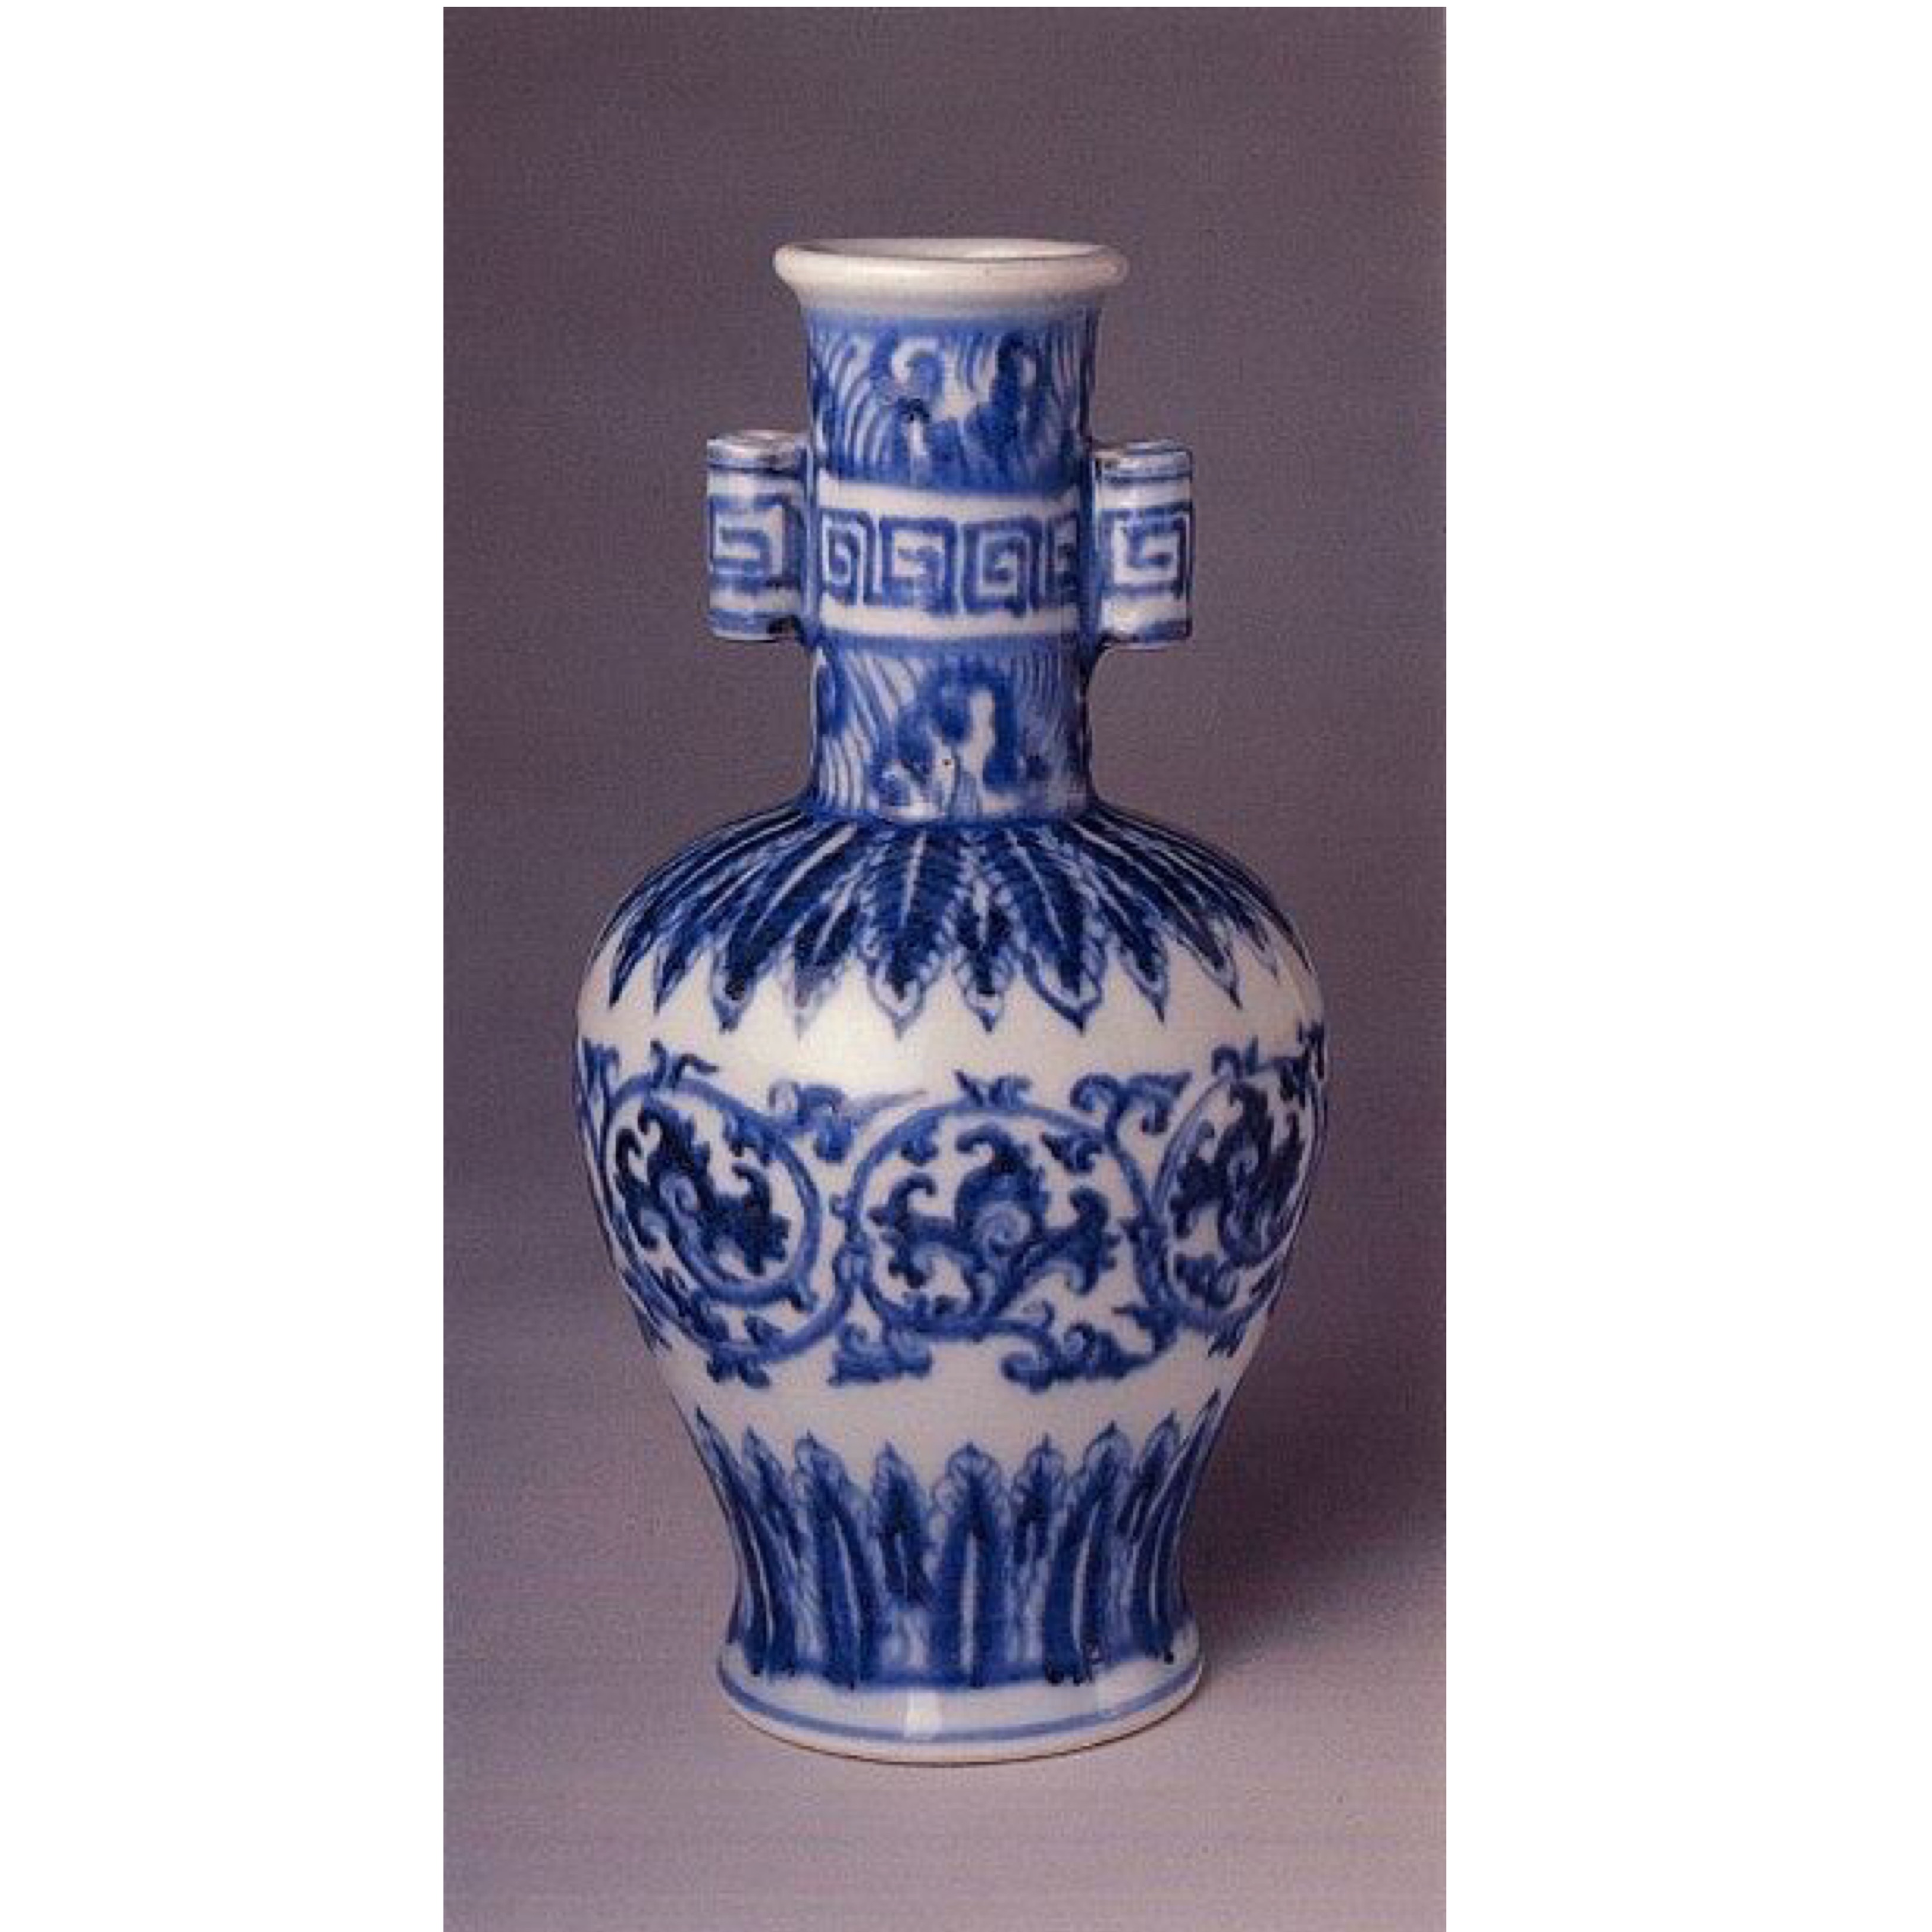 Ming dynasty Xuande mark and period (1426–35) imperial blue and white vase with Persian influences